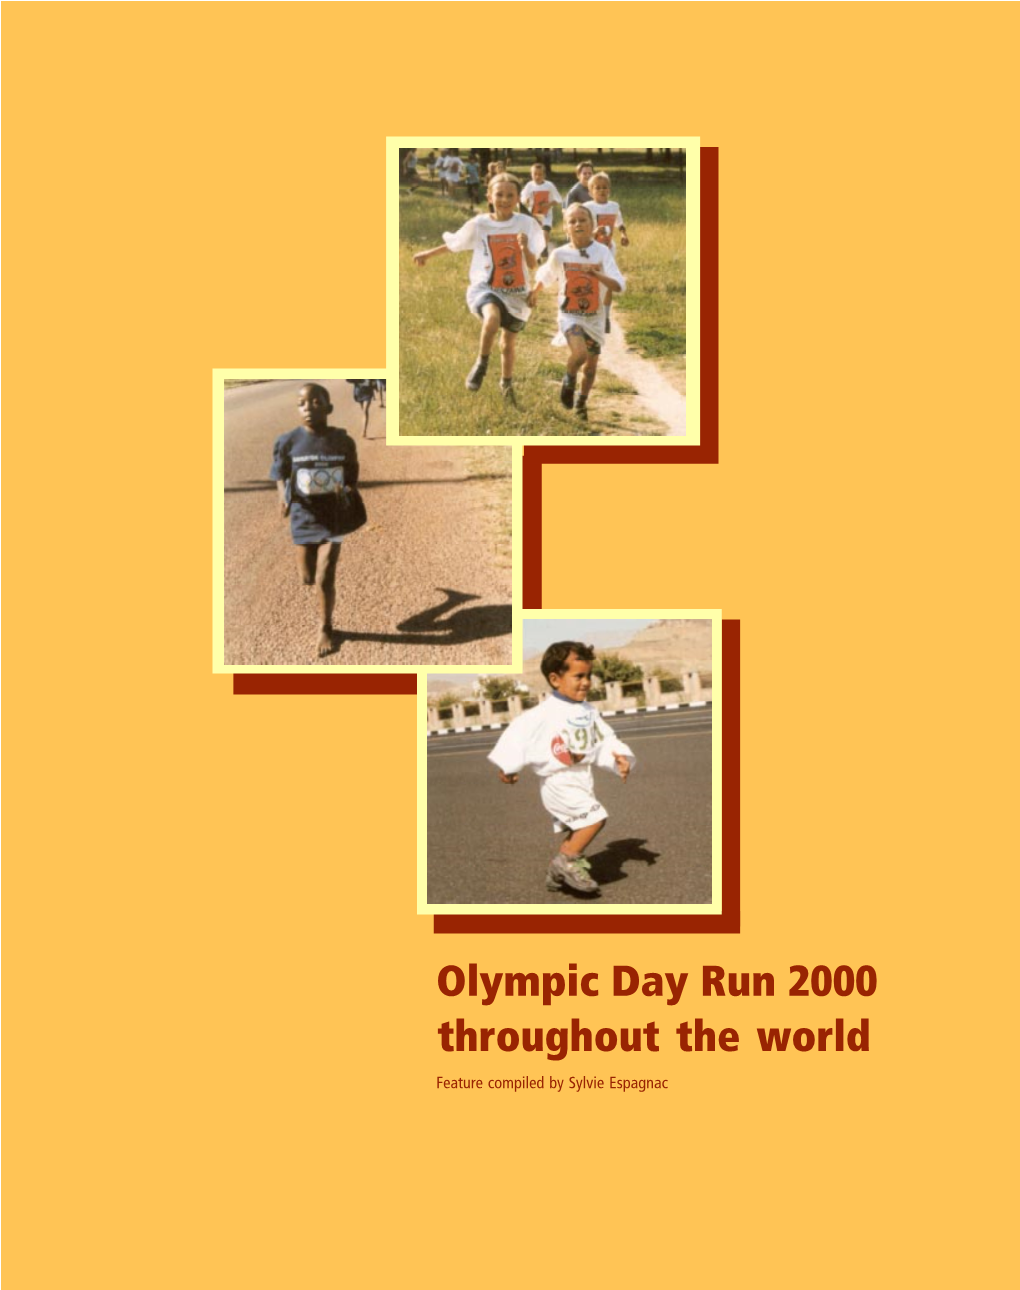 Olympic Day Run 2000 Throughout the World